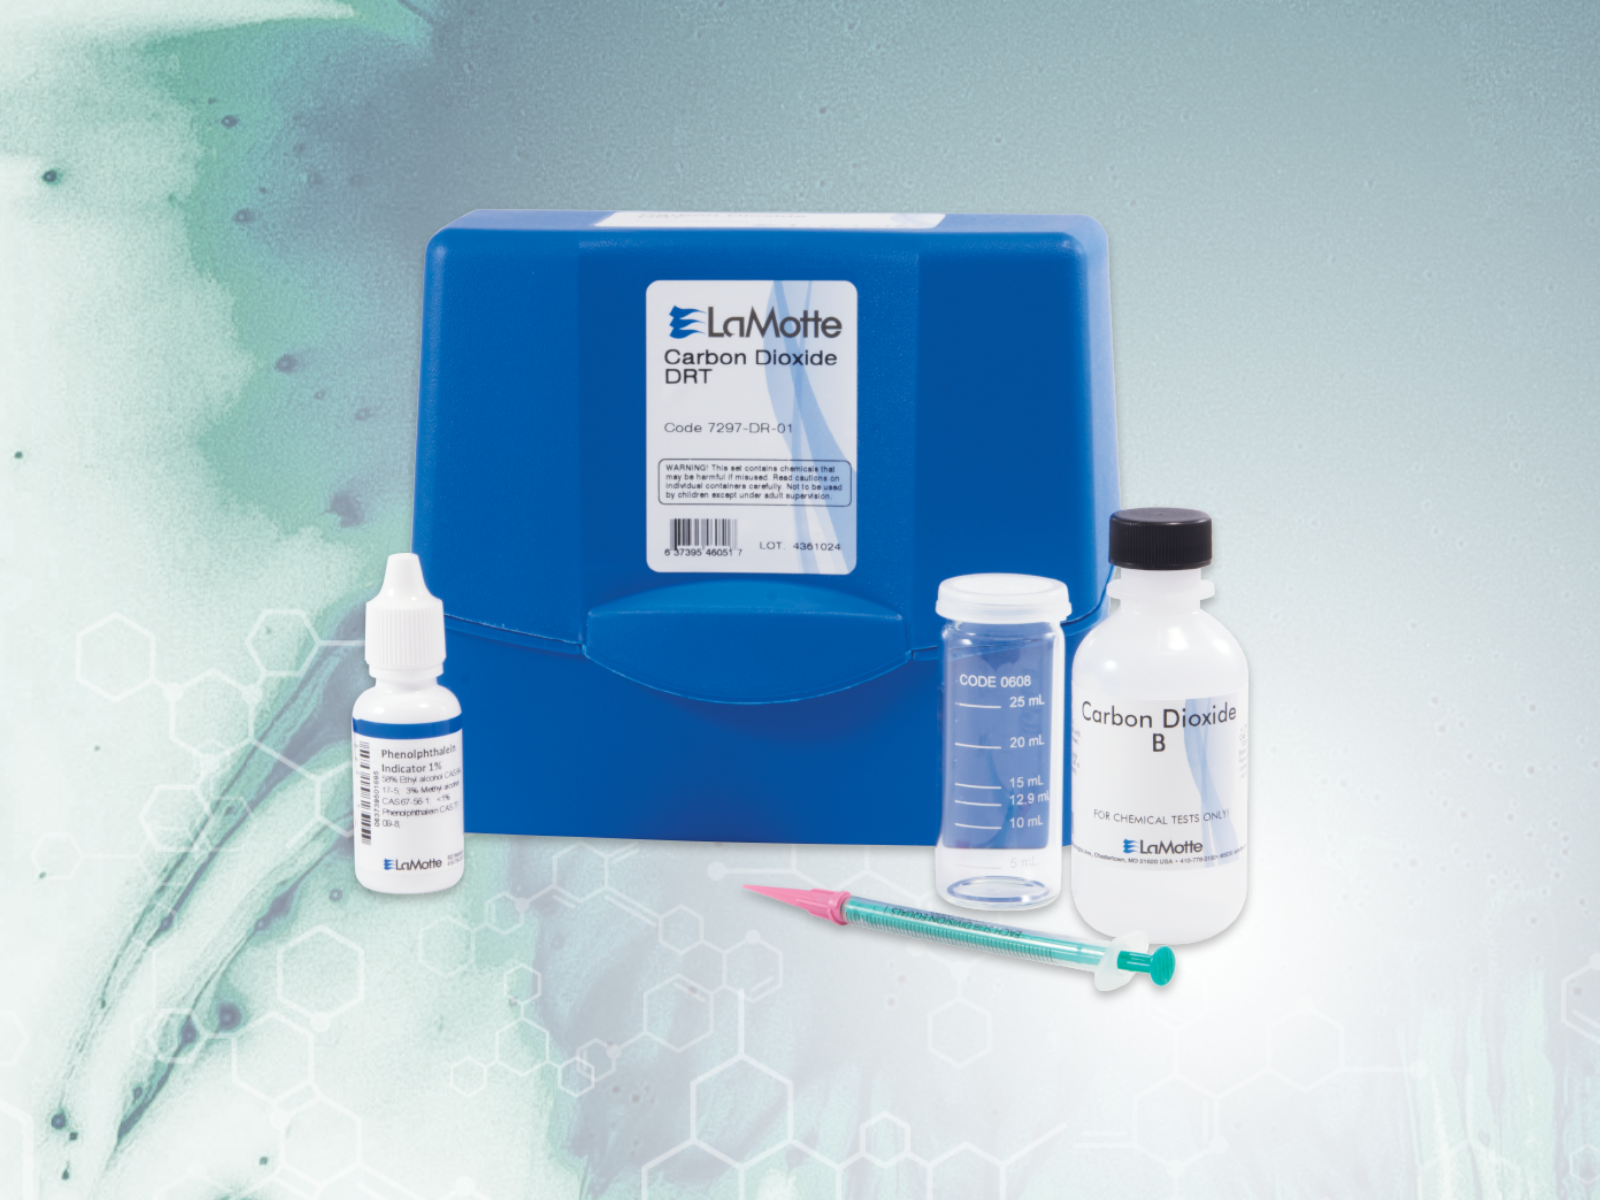 Accurate Water Quality Testing with the LaMotte Carbon Dioxide Test Kit from Vendart